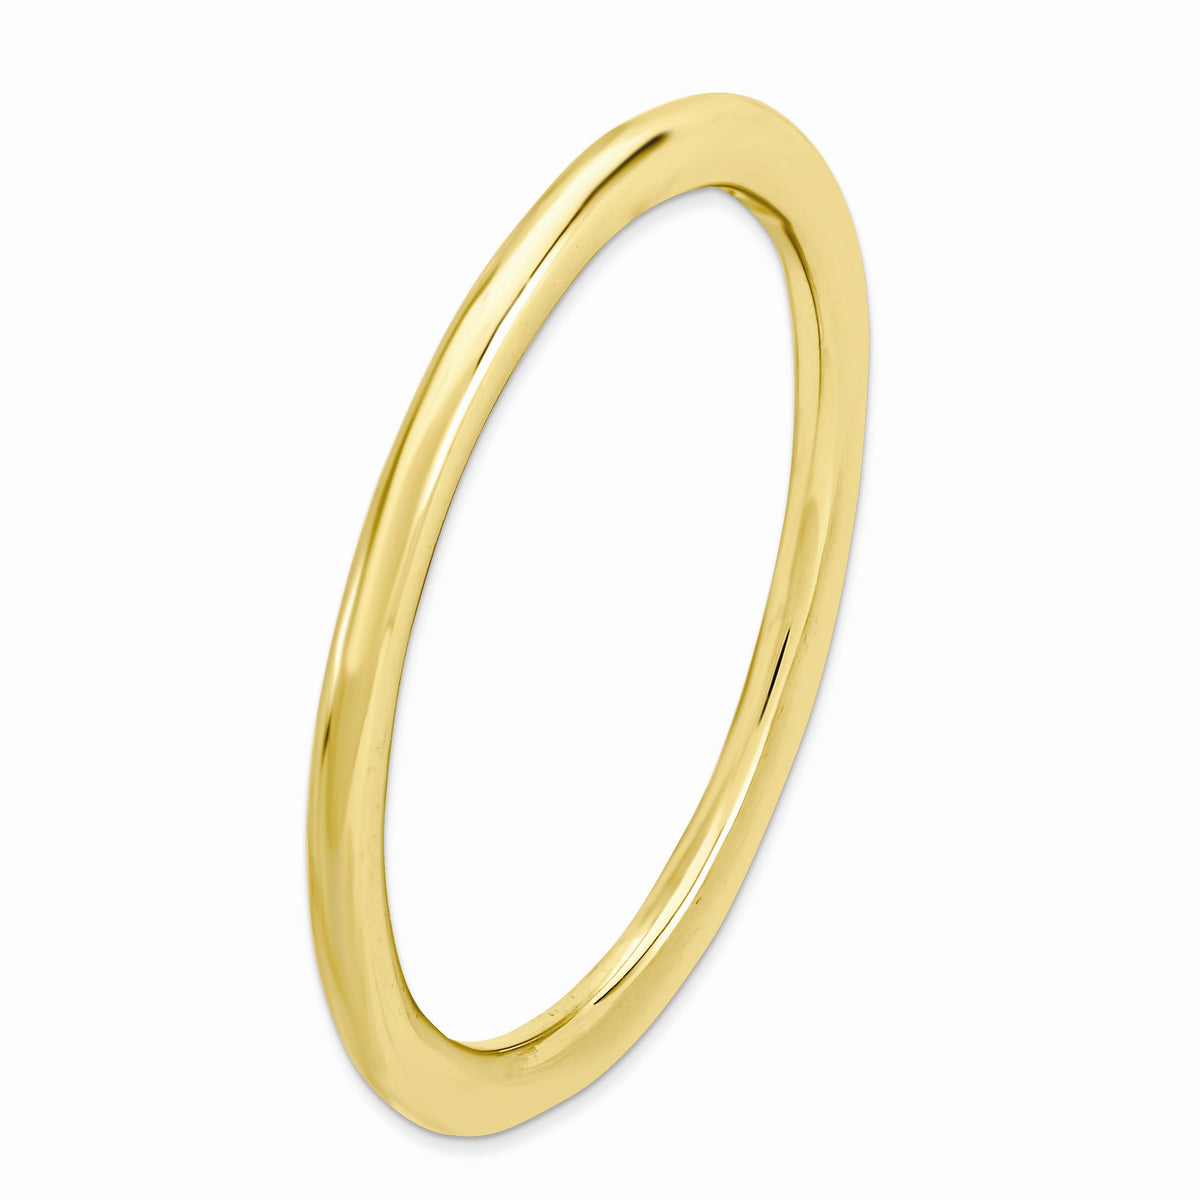 Alternate view of the 1mm 14k Yellow Gold Plated Sterling Silver Polished Elegant Stack Band by The Black Bow Jewelry Co.